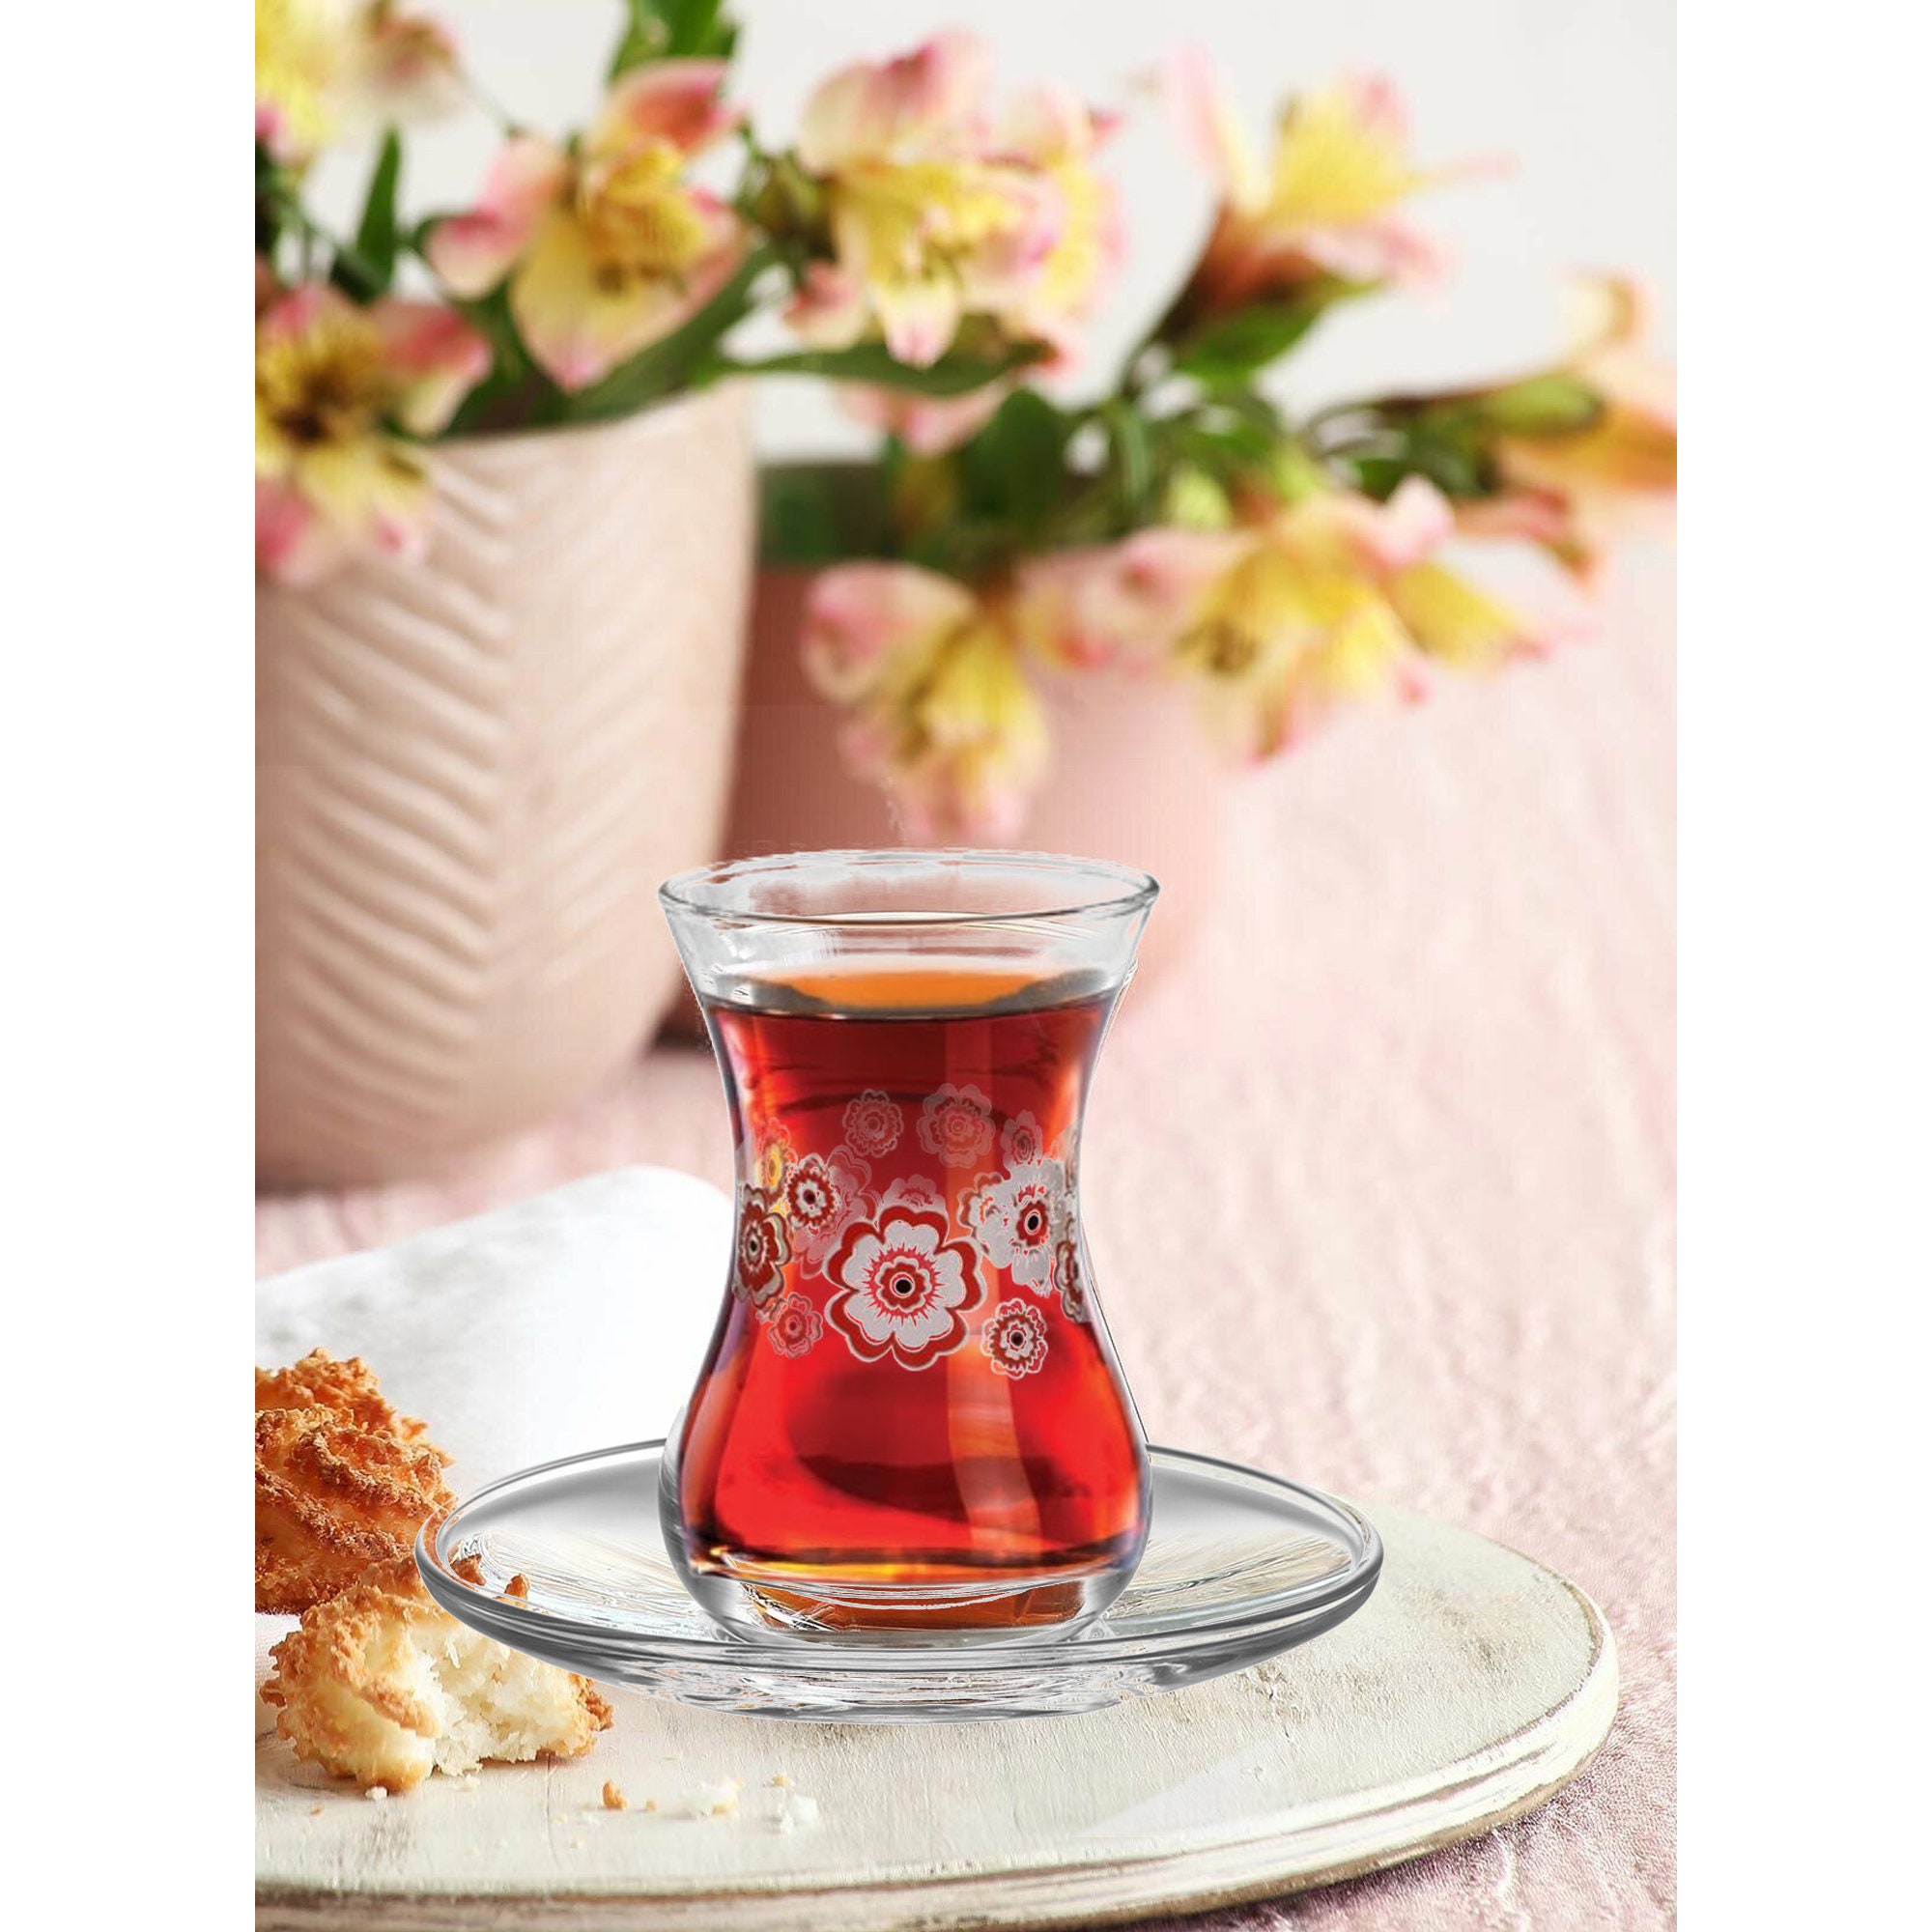 Made in Turkey Beautiful Crystal Clear Glass Teacups Dishwasher Safe LAV Elegant Turkish Tea Glasses and Saucers 4 Ounce Cups with 4 Inch Plates 12 Piece Set Includes 6 Glasses and 6 Saucers